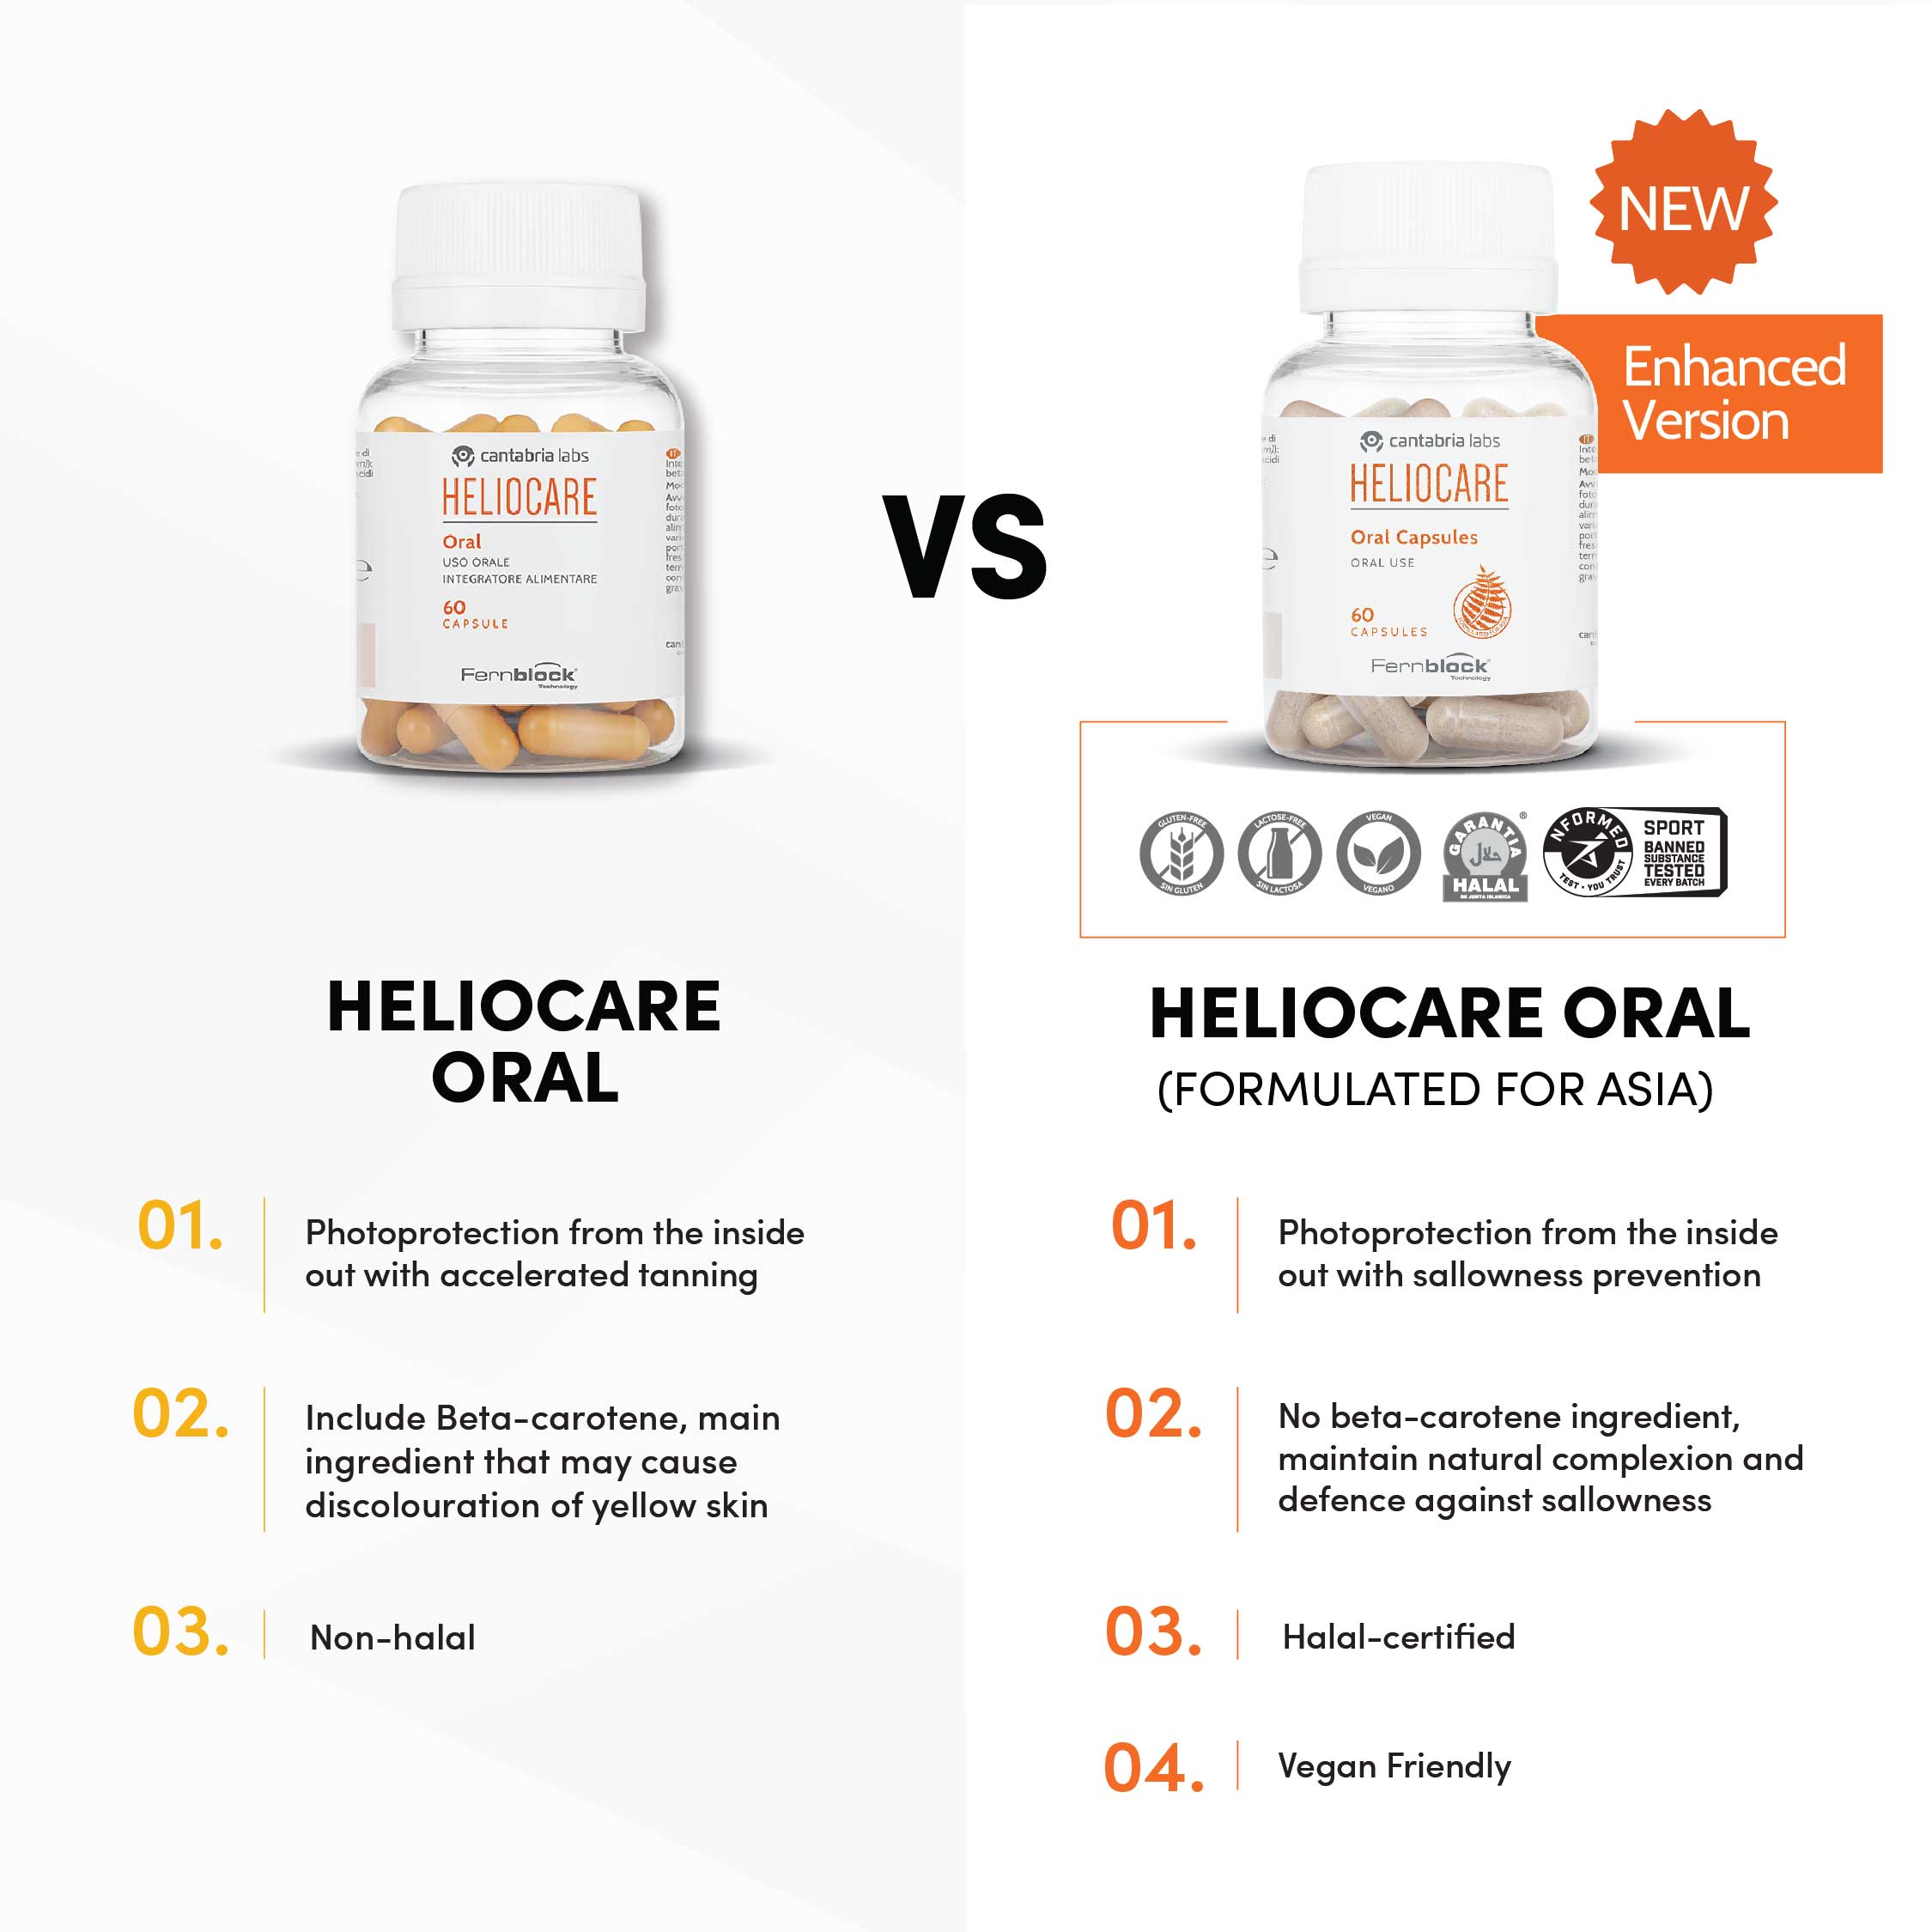 Heliocare Oral Infographic - new enhanced version of Heliocare Oral